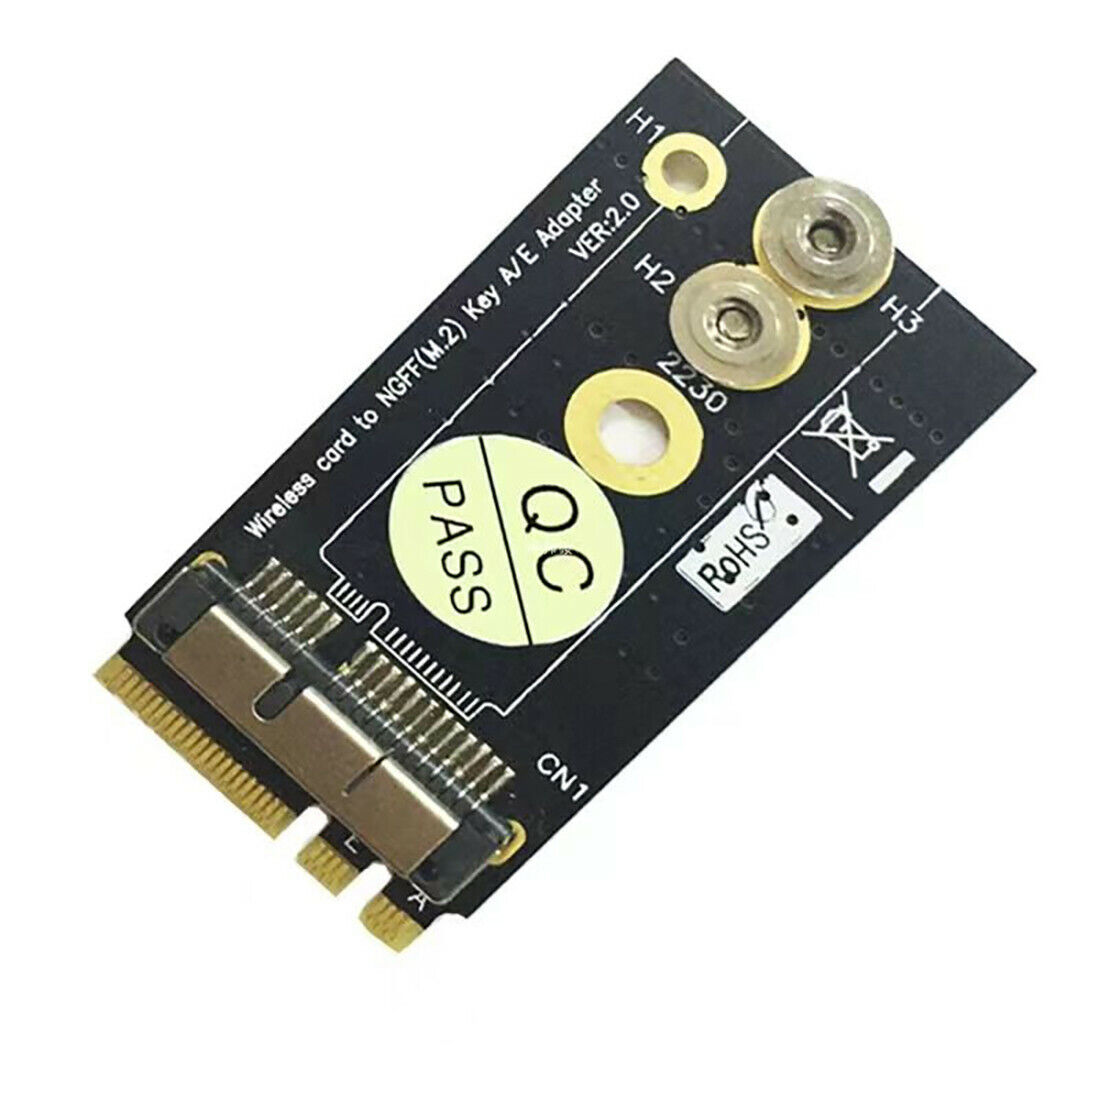 BCM94360CS2/BCM943224 to NGFF(M.2) Key A/E Adapter Card For Mac OS Hackintosh